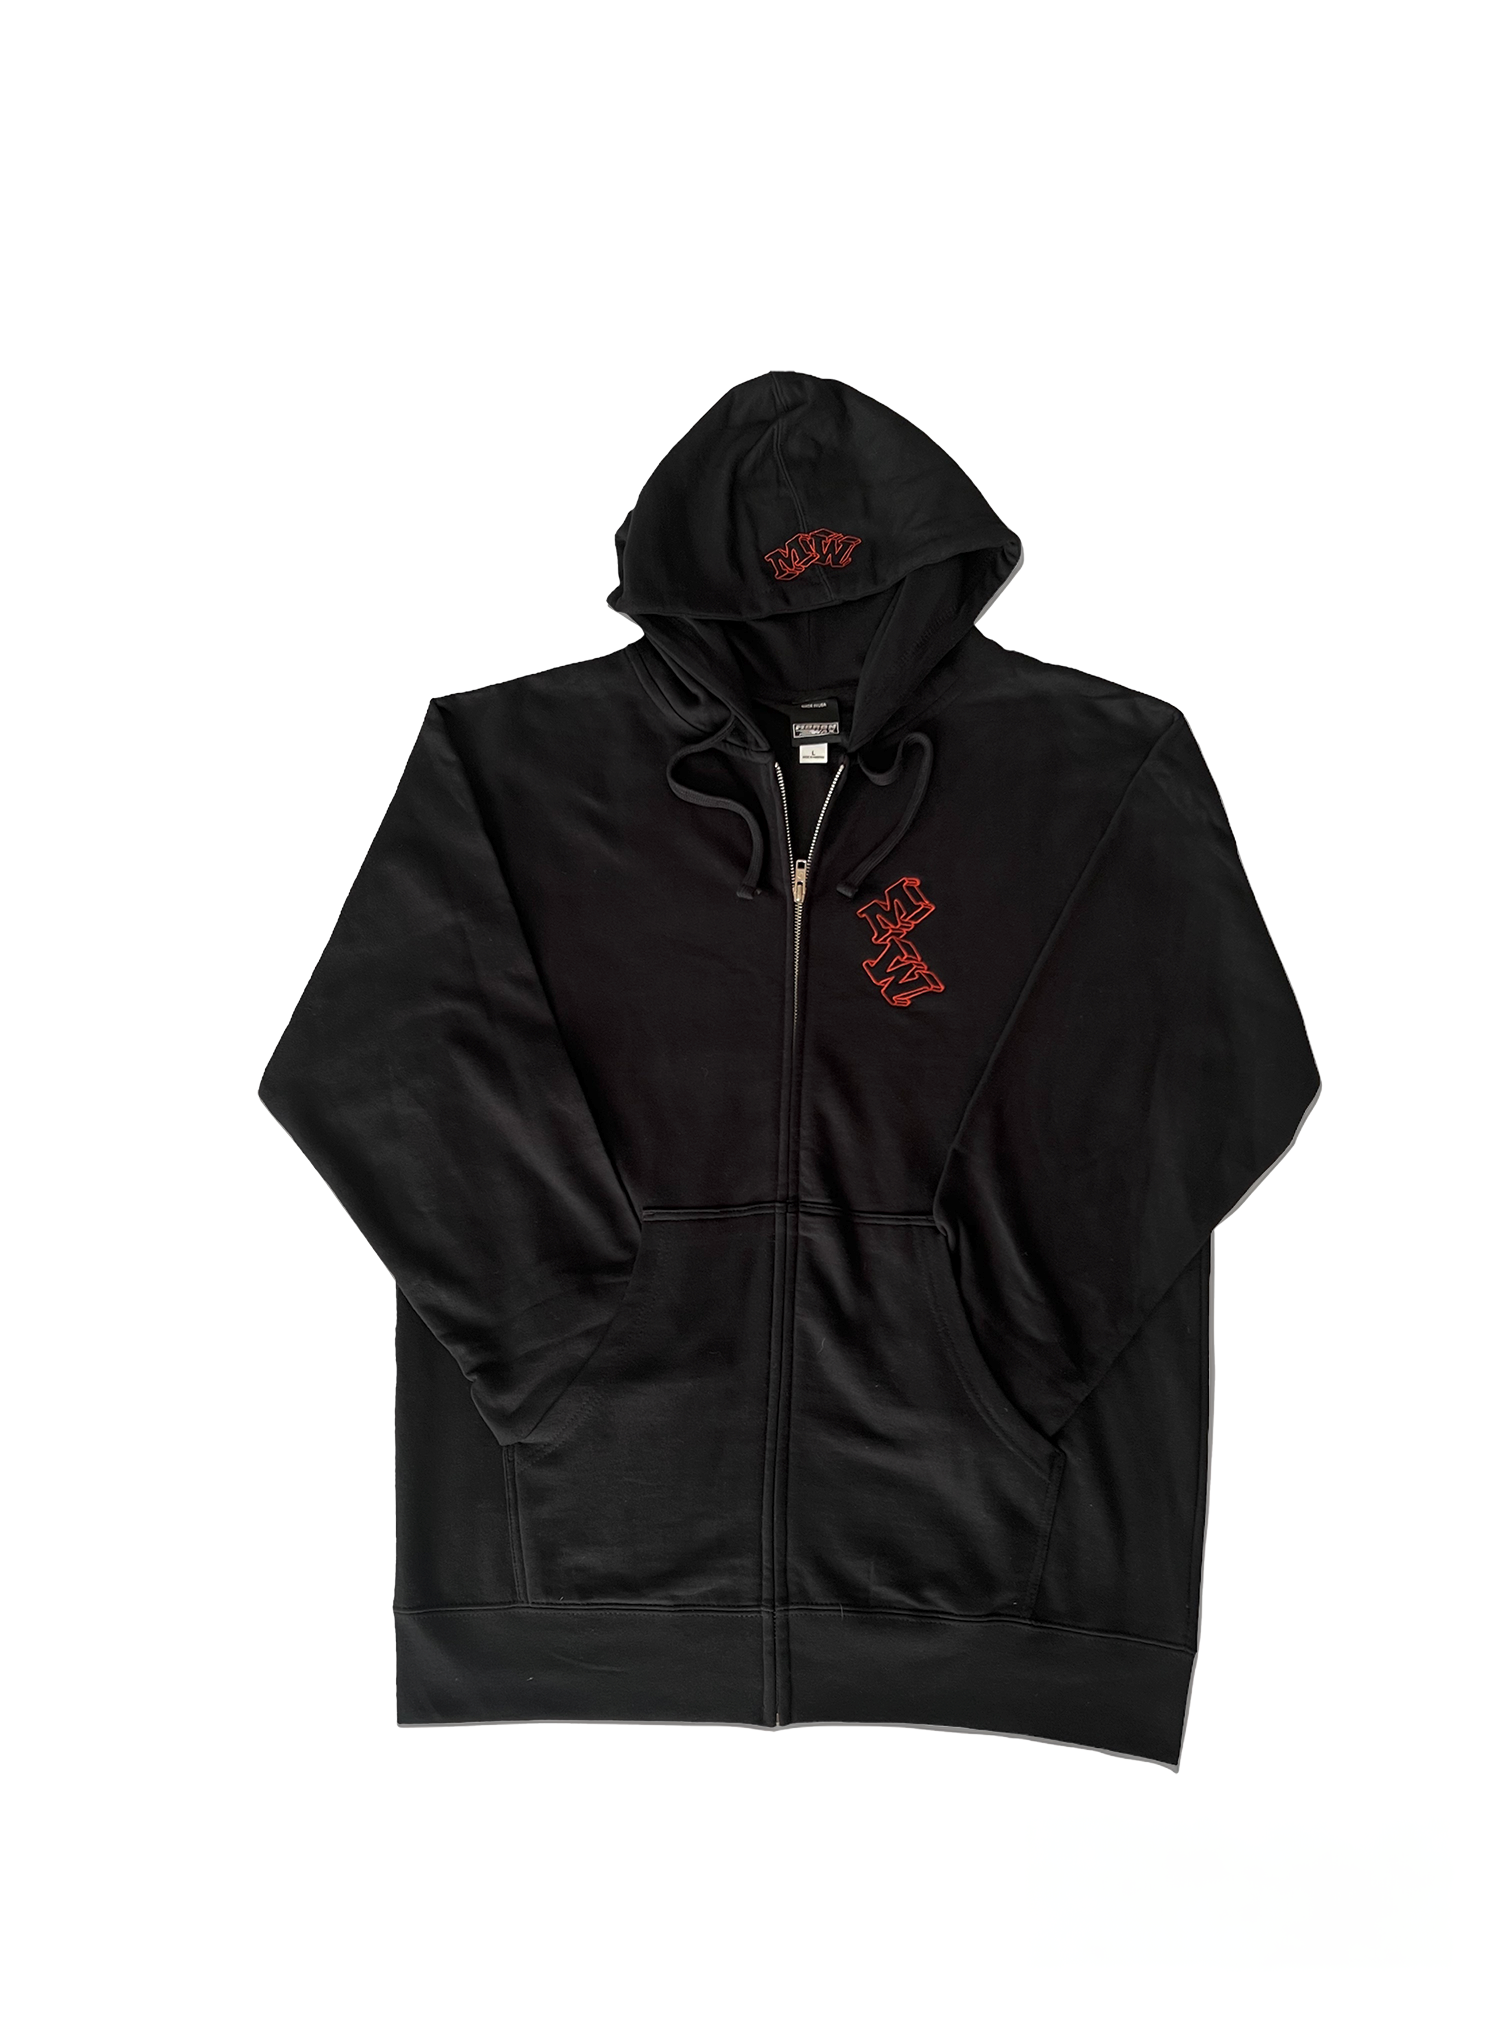 Double Embroidery Zip-Up Black